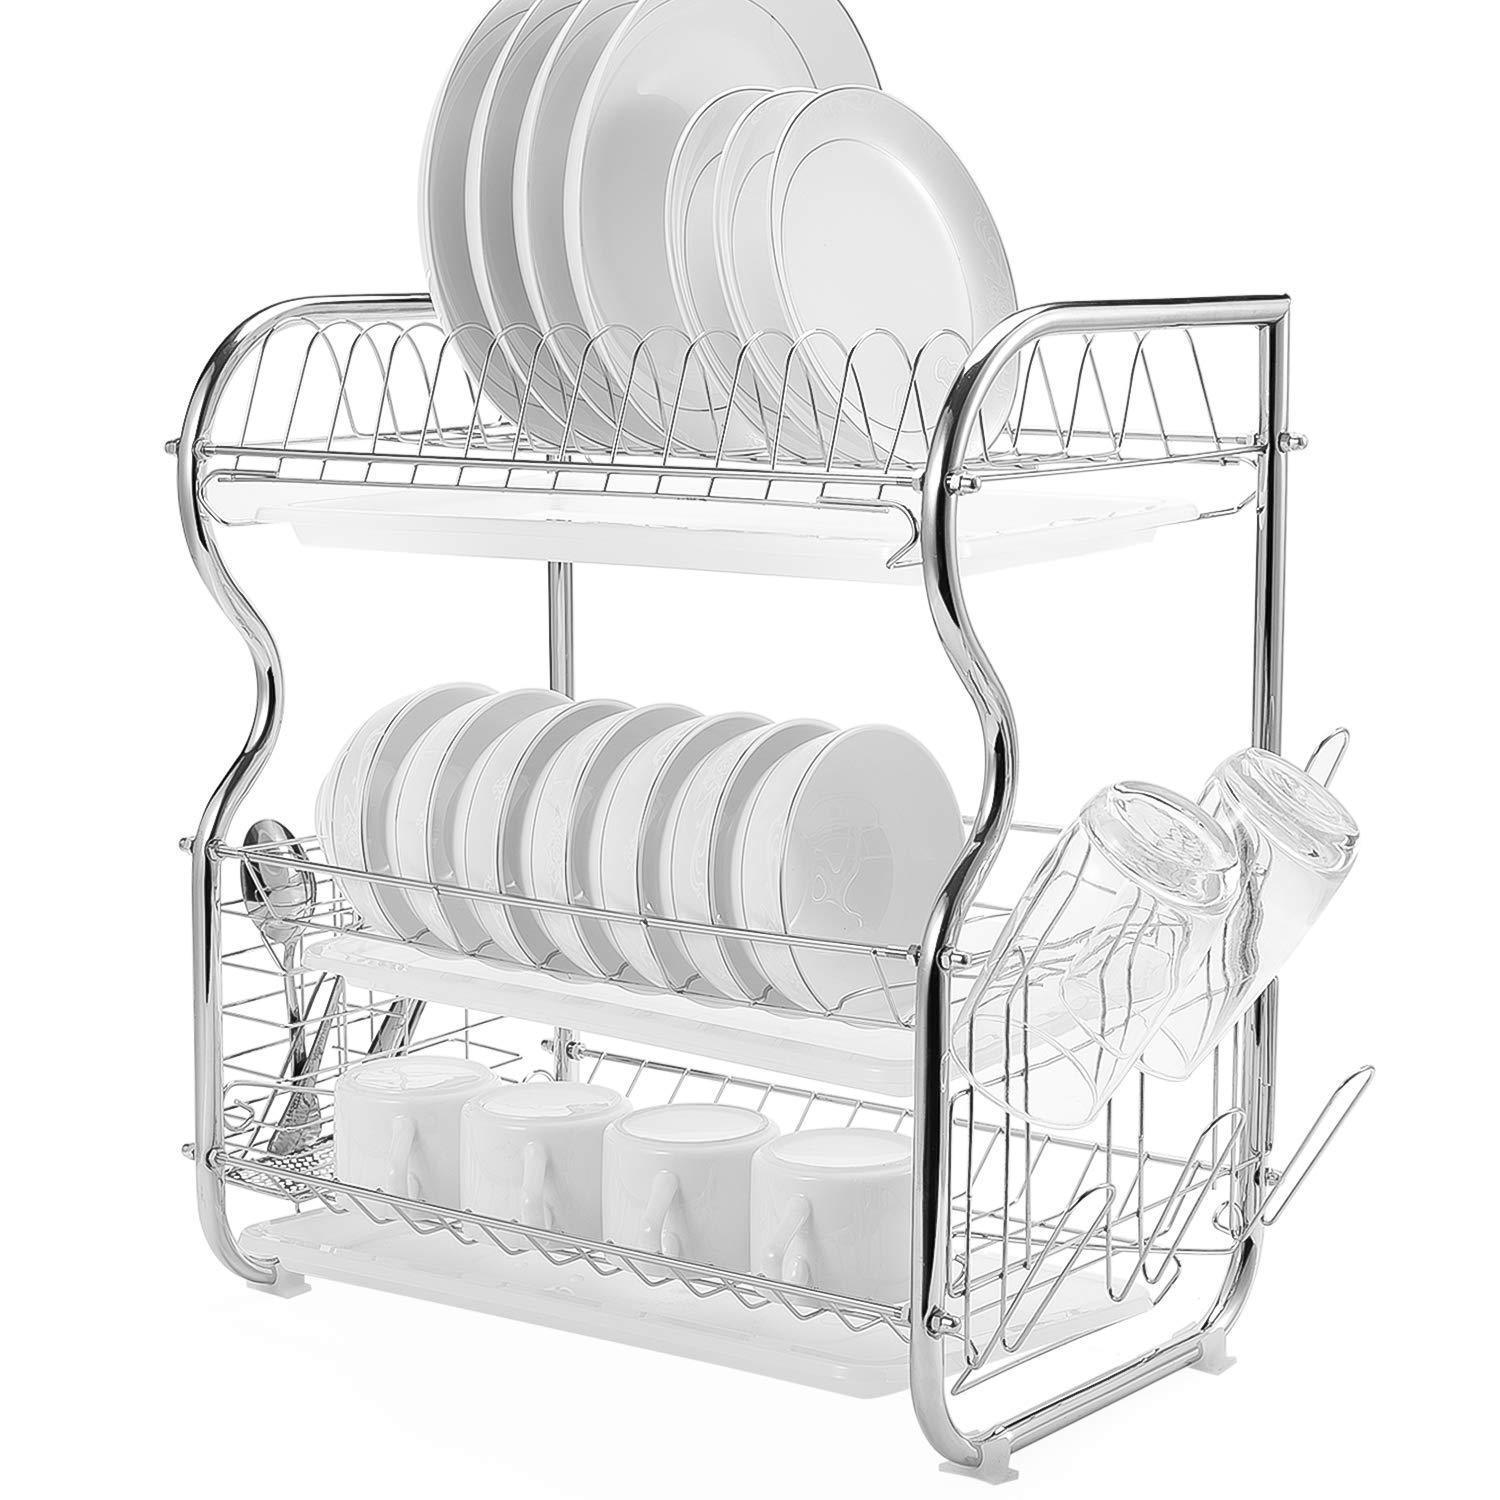 Glotoch Dish Drying Rack, 3 Tier Dish Rack with Utensil Holder, Cup Holder and Dish Drainer for Kitchen Counter Top, Plated Chrome Dish Dryer Silver 17.2 x 9.5 x 15 inch